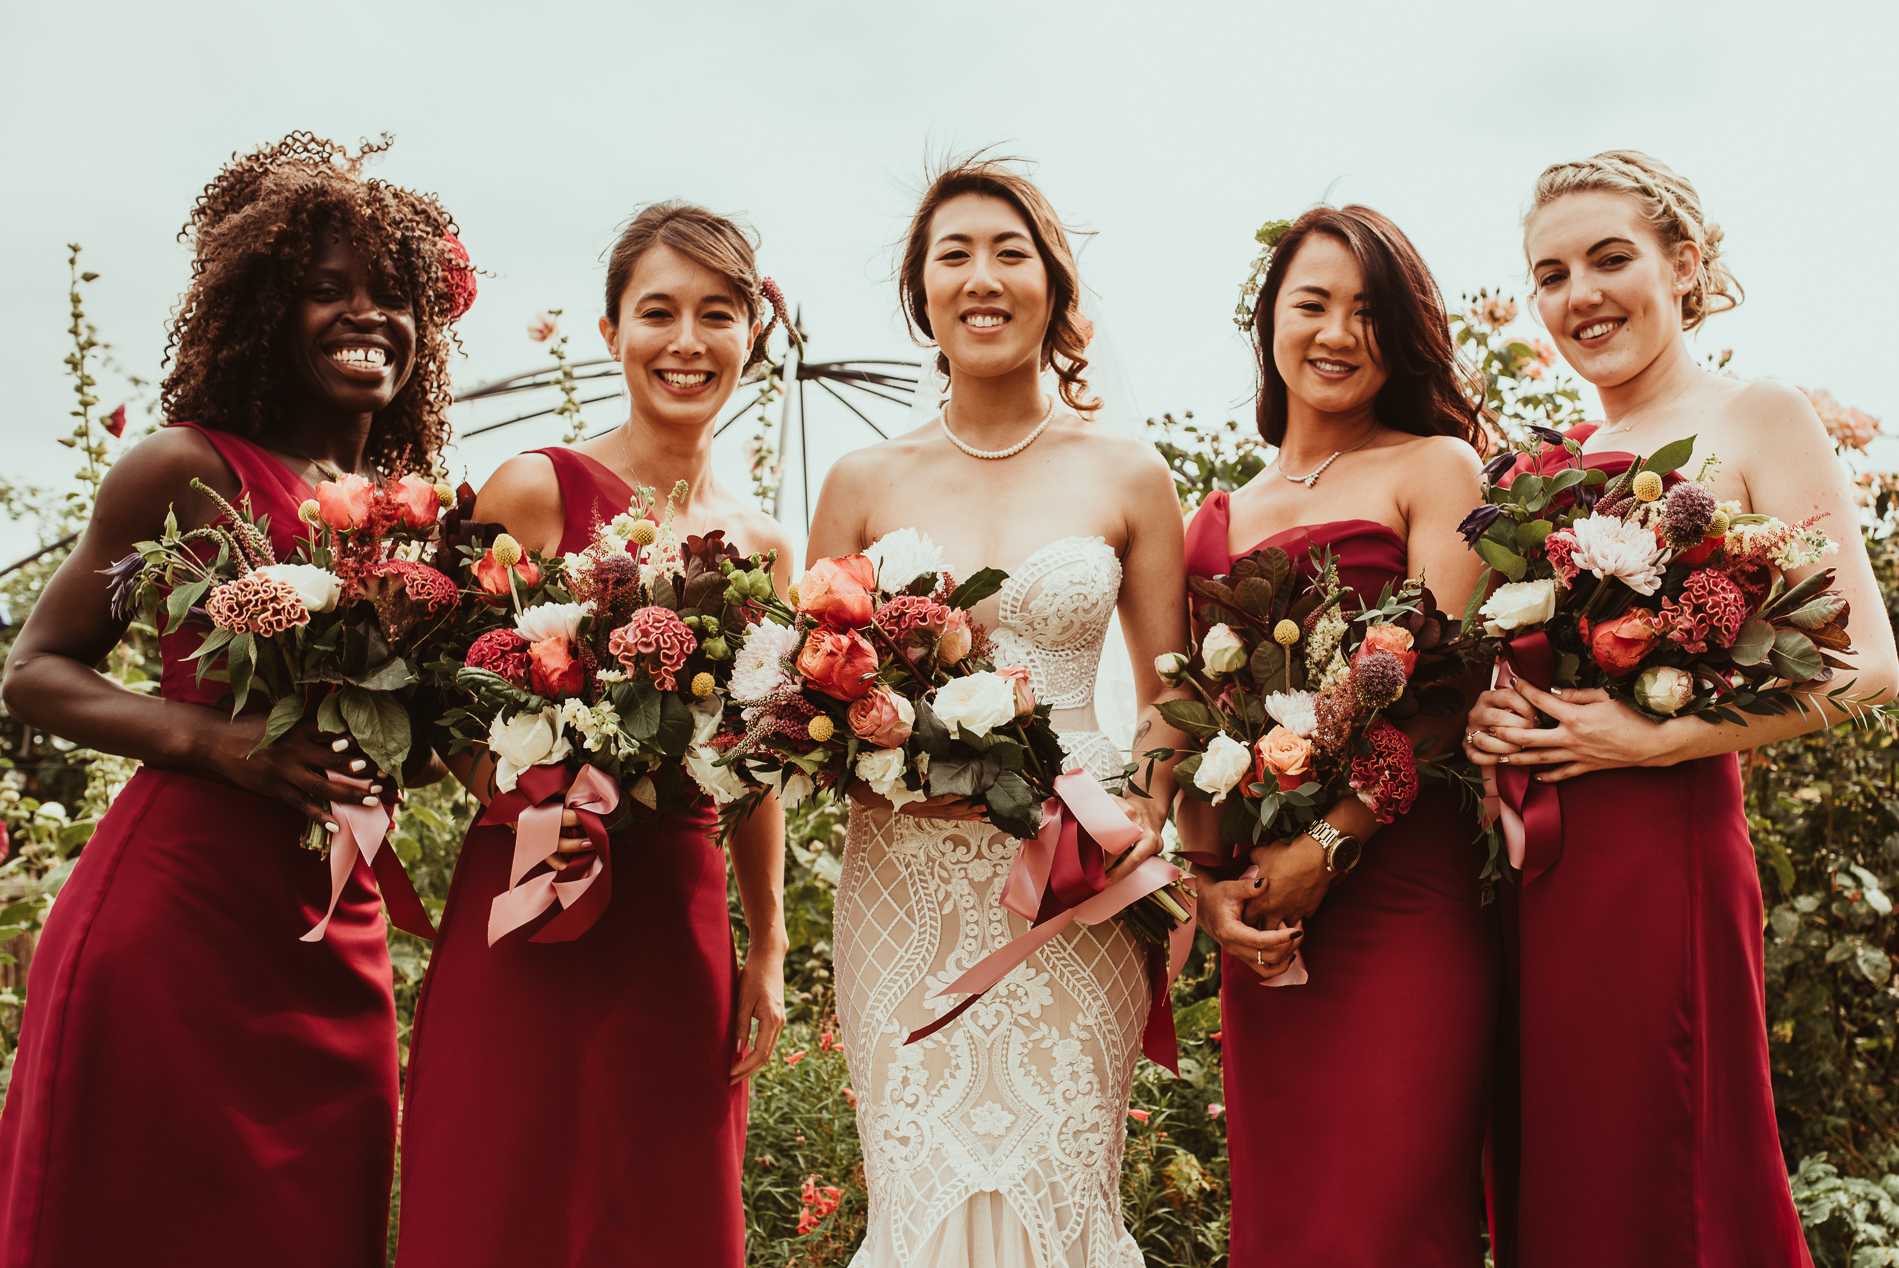 Bridesmaids and wedding flowers from the Flower Monger at White Dove Barns